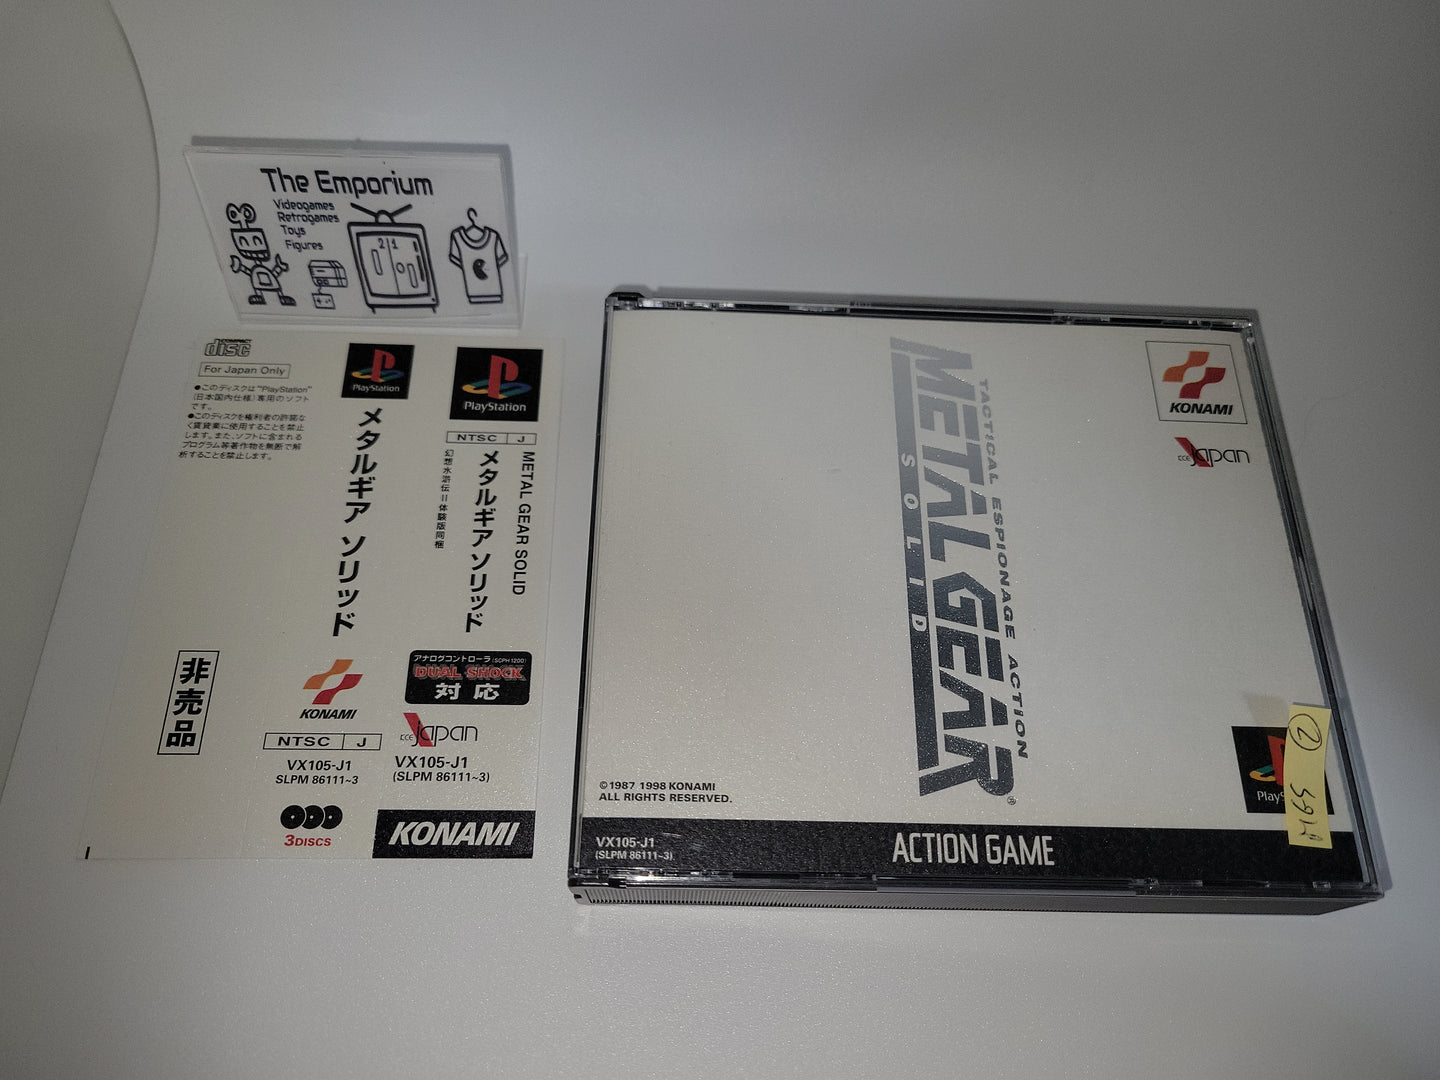 Metal Gear Solid (silver color cover version) - Sony PS1 Playstation